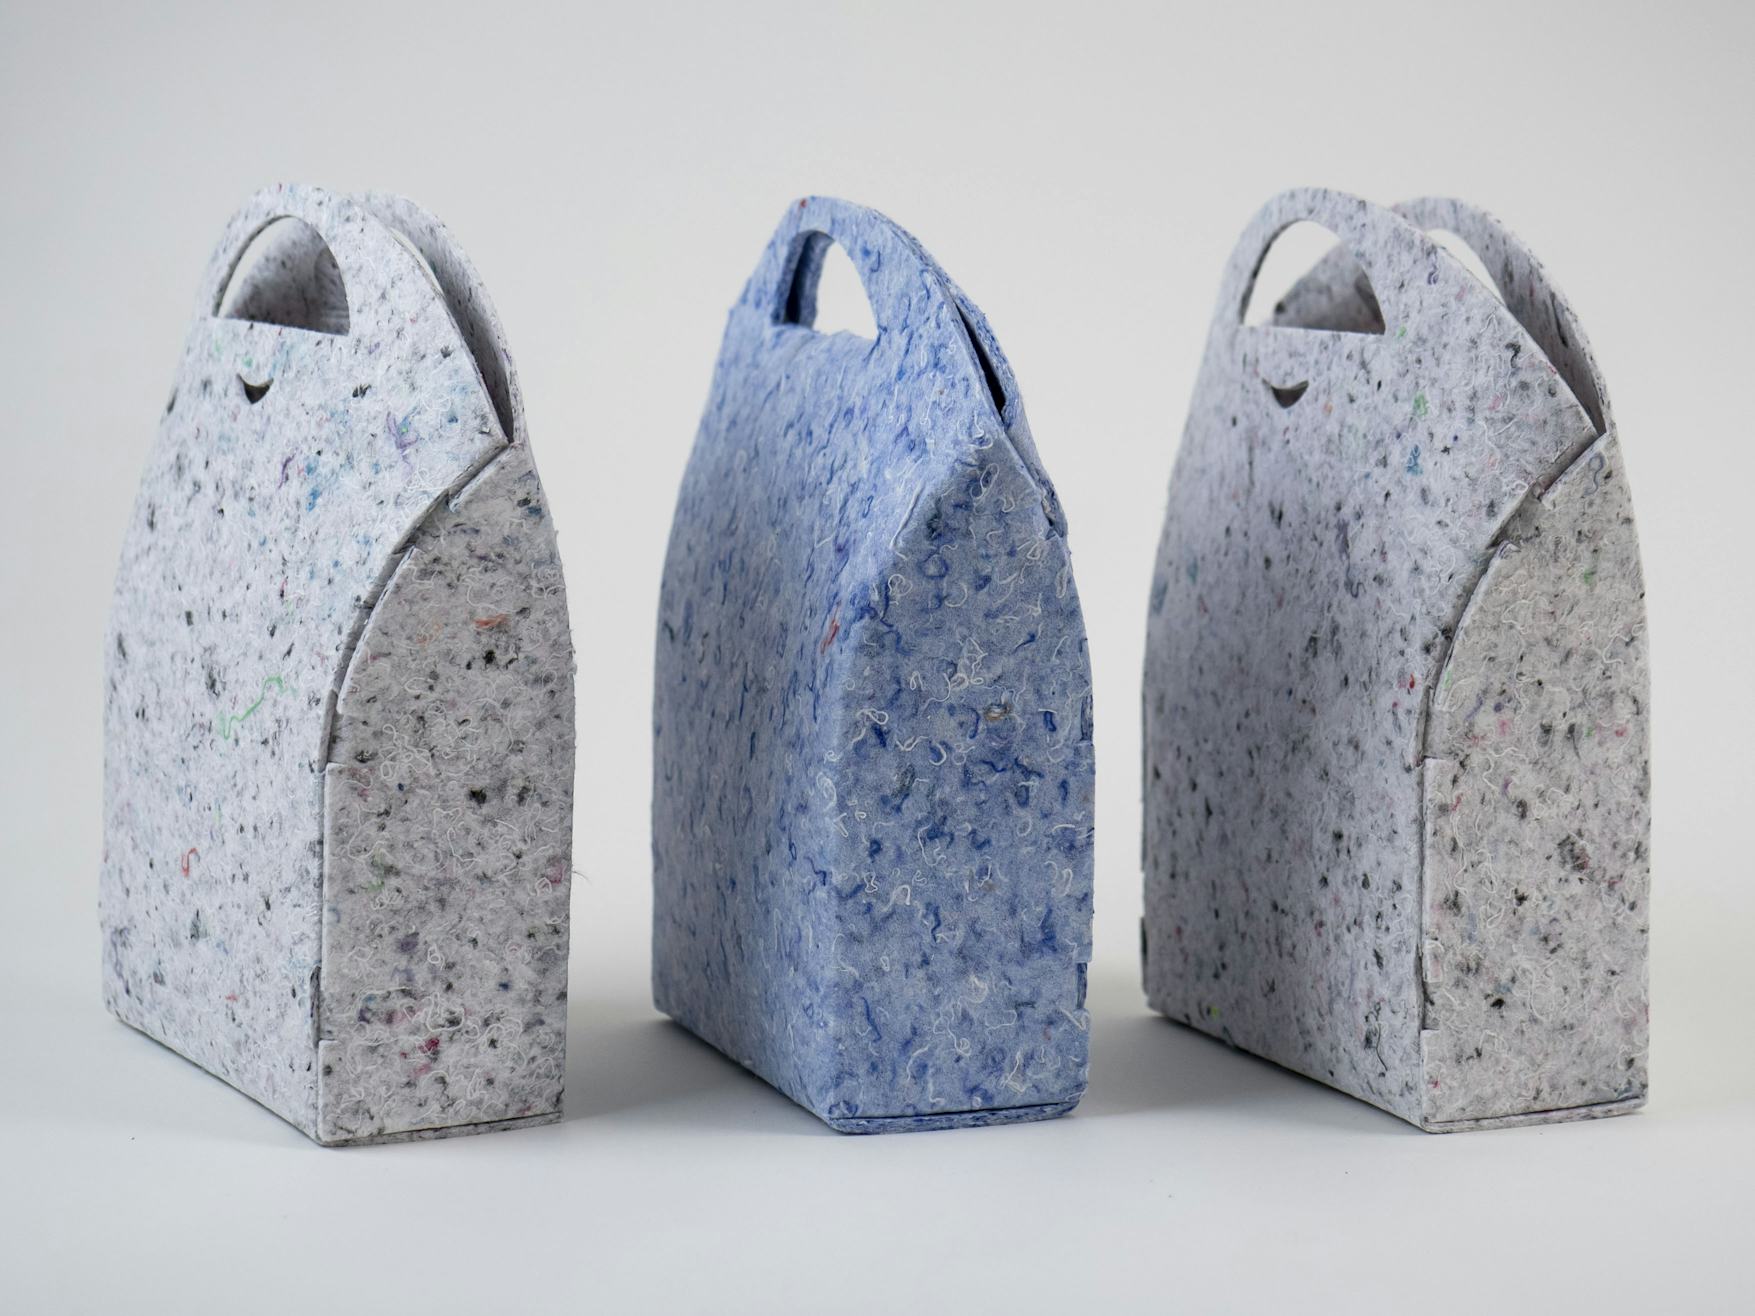 Bags made from UPtex recycled textiles material. Image Source: UPPAREL